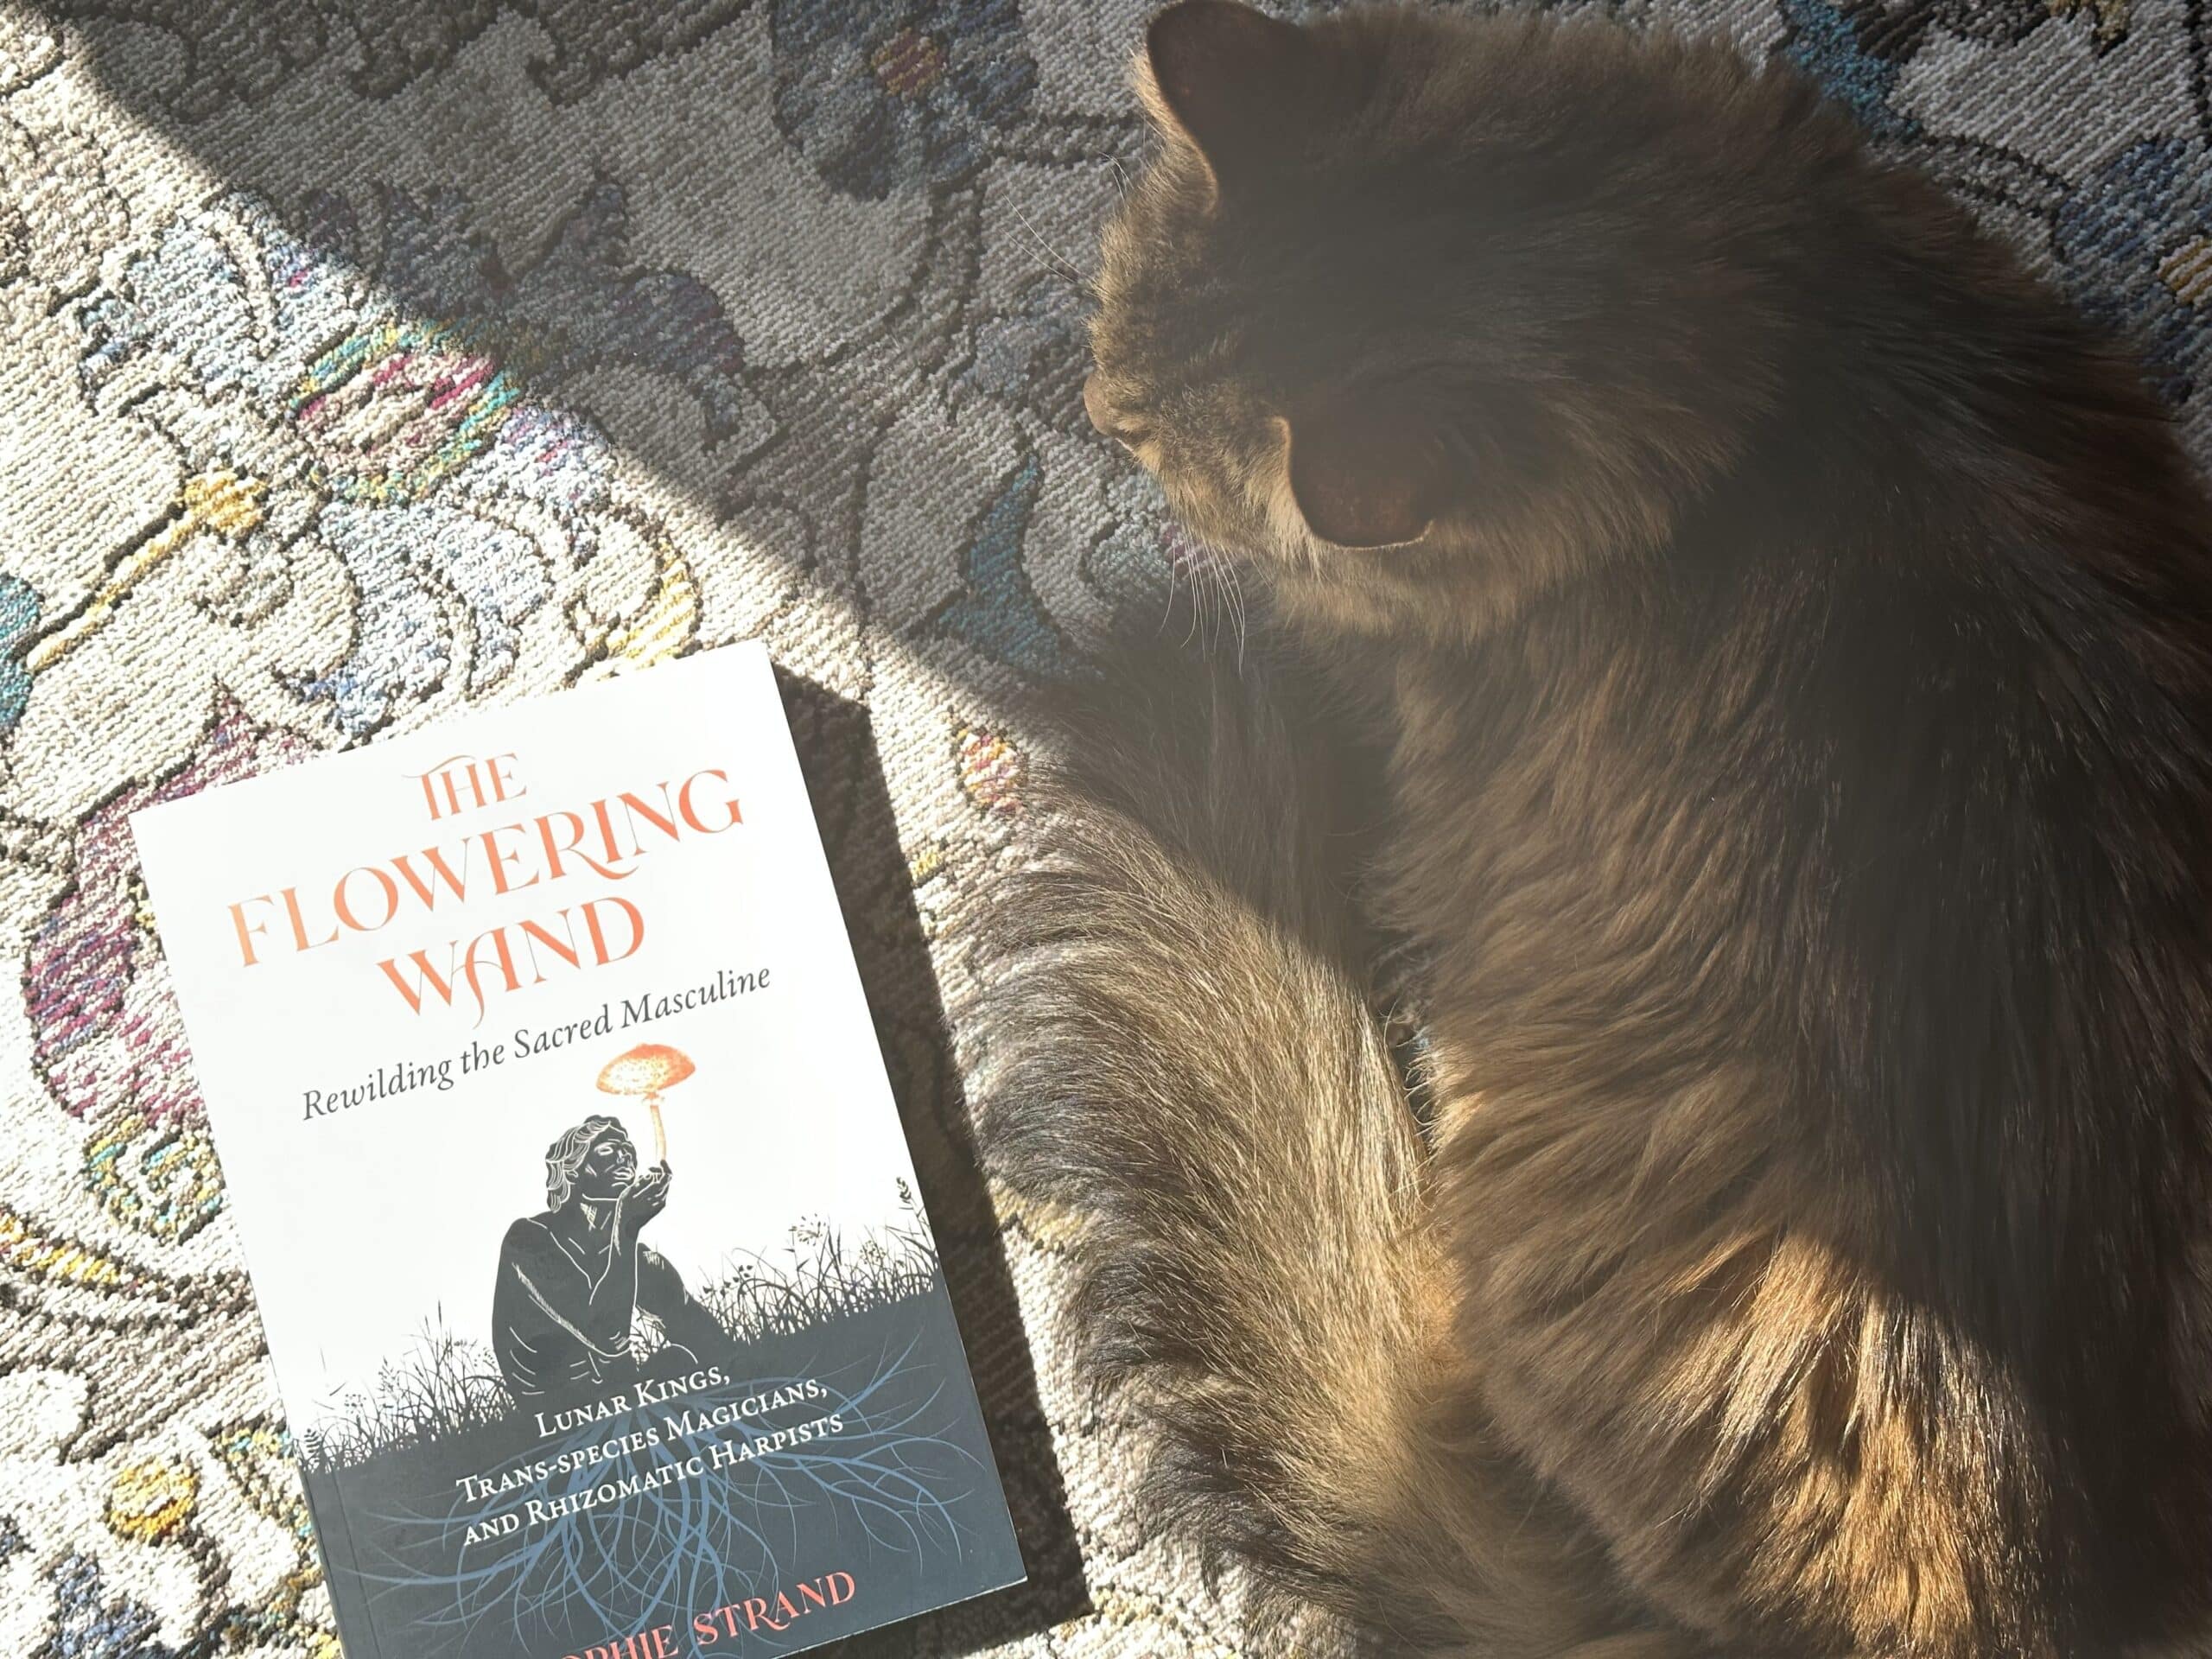 Lex's long haired tabby cat sitting next to a copy of The Flowering Wand on a patterned carpet.